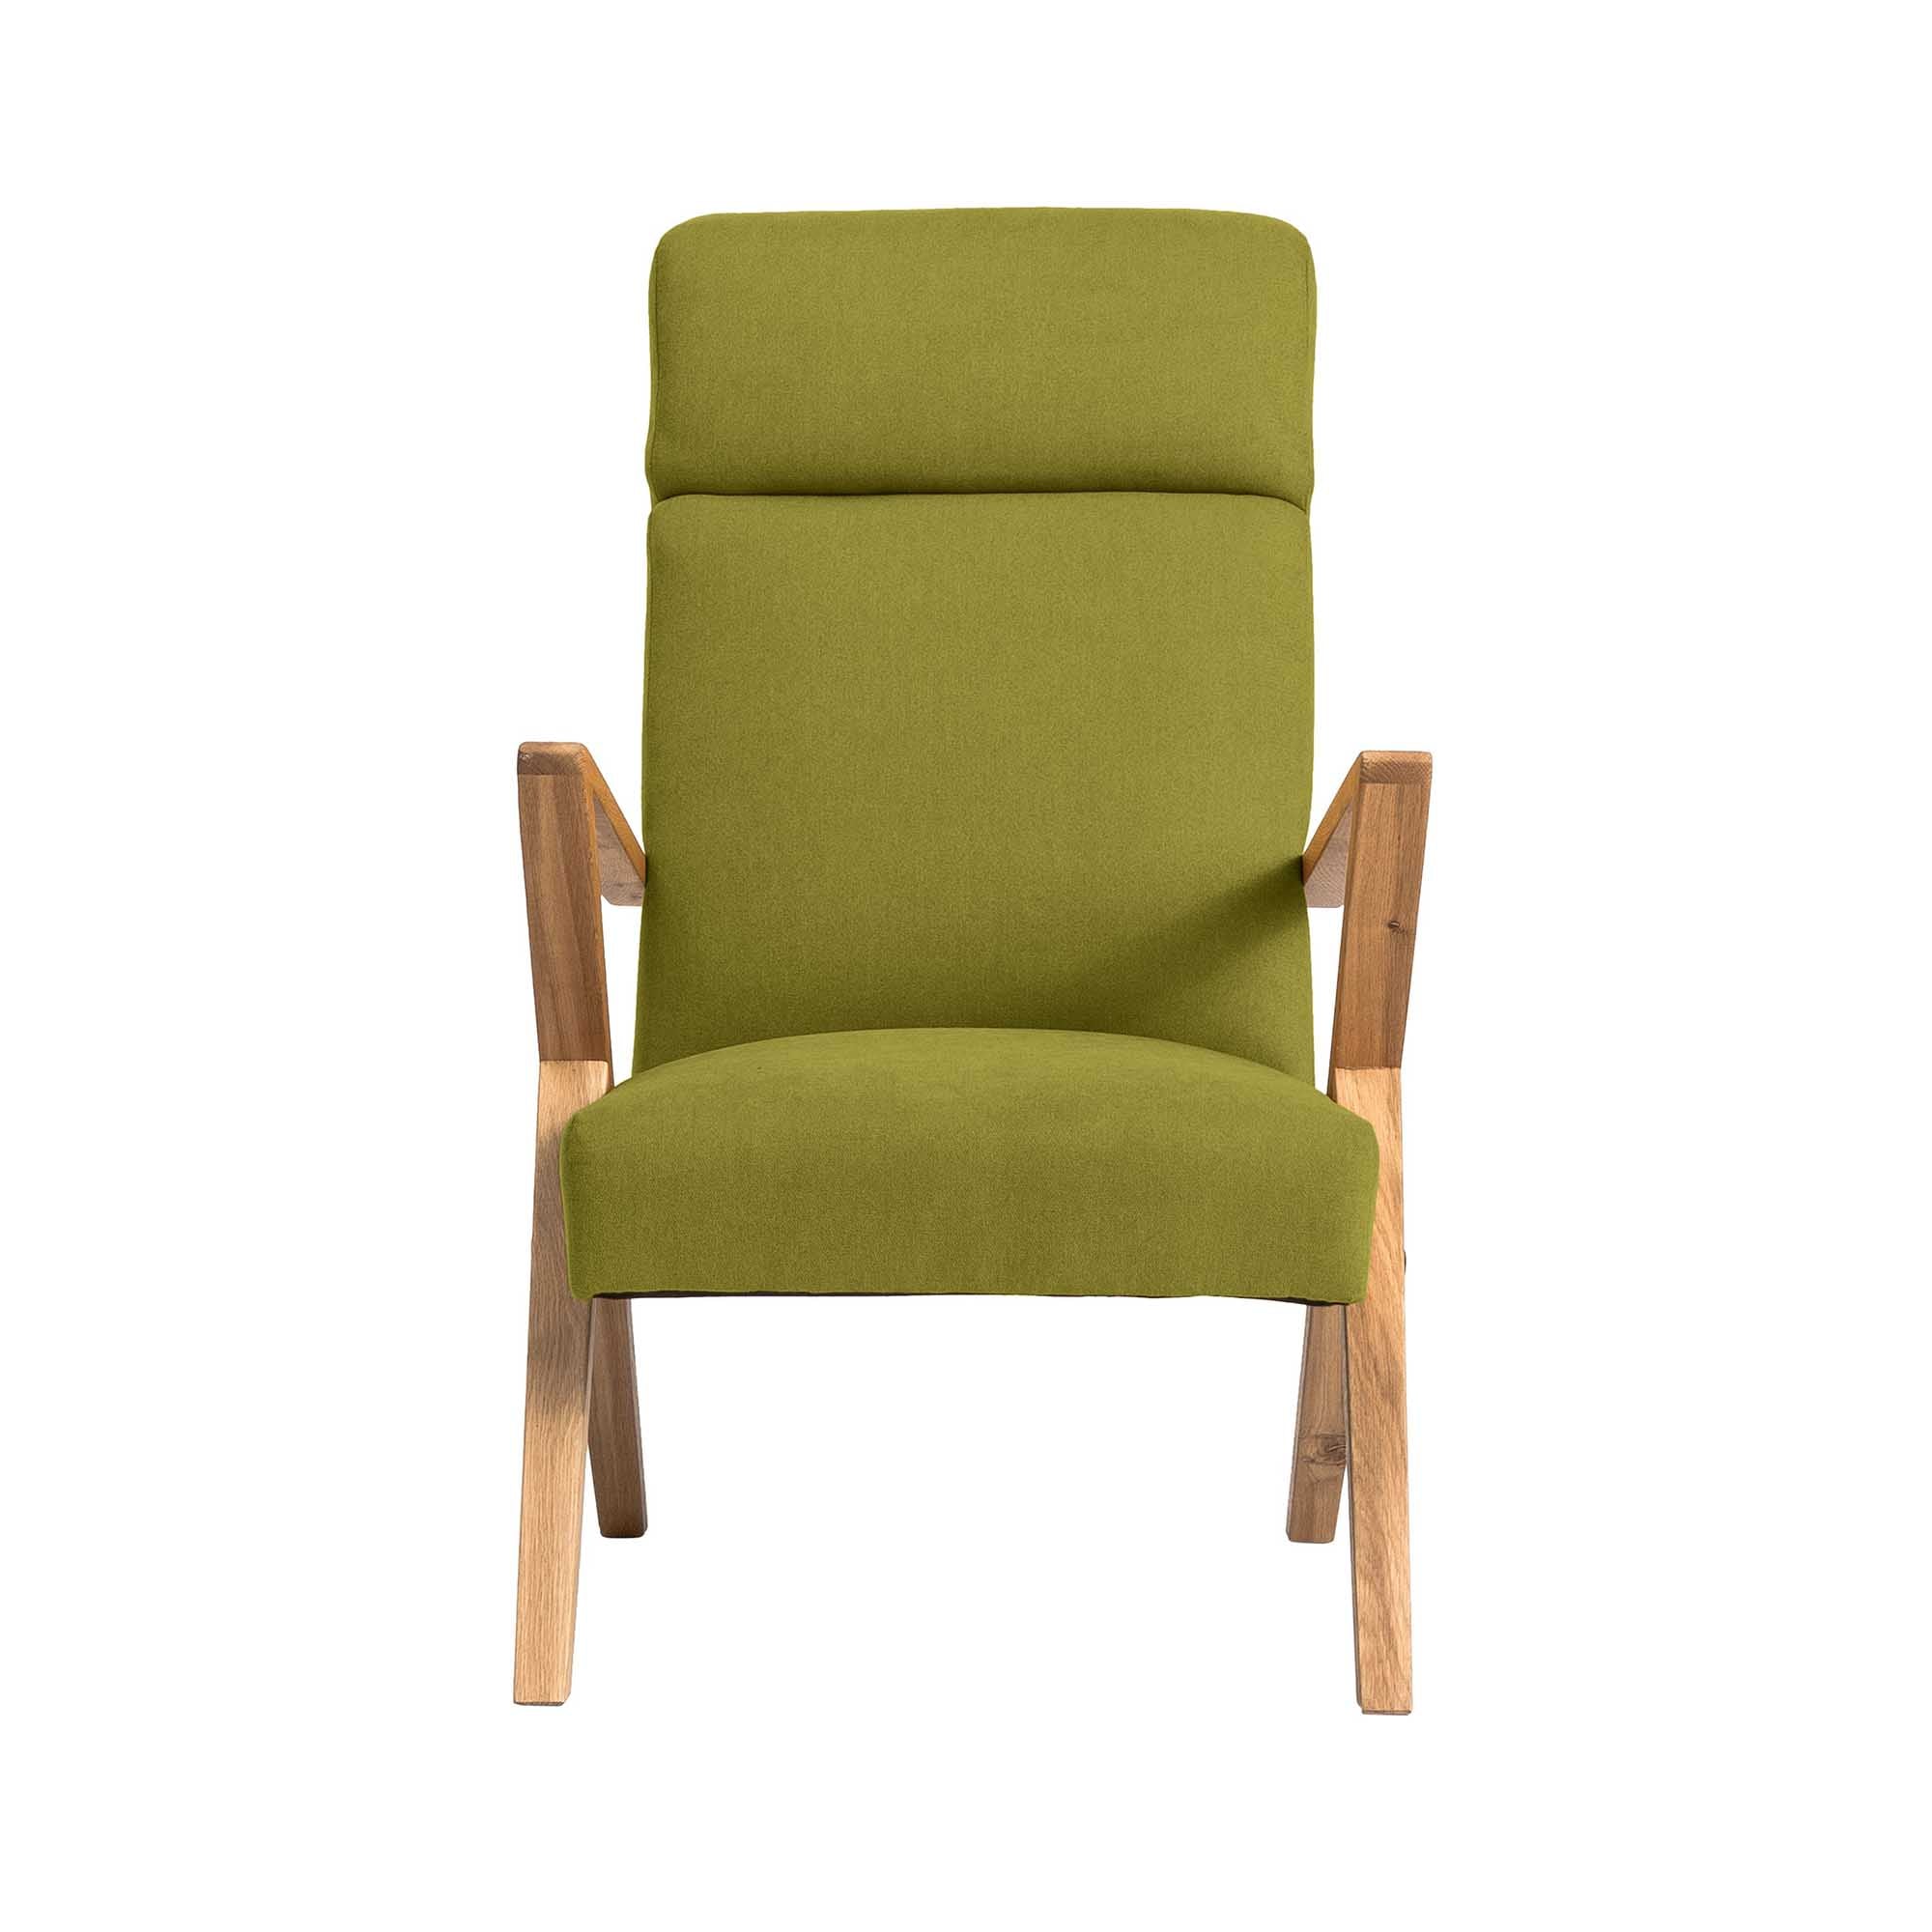 Lounge Chair, Oak Wood Frame, Natural Colour green fabric, front view